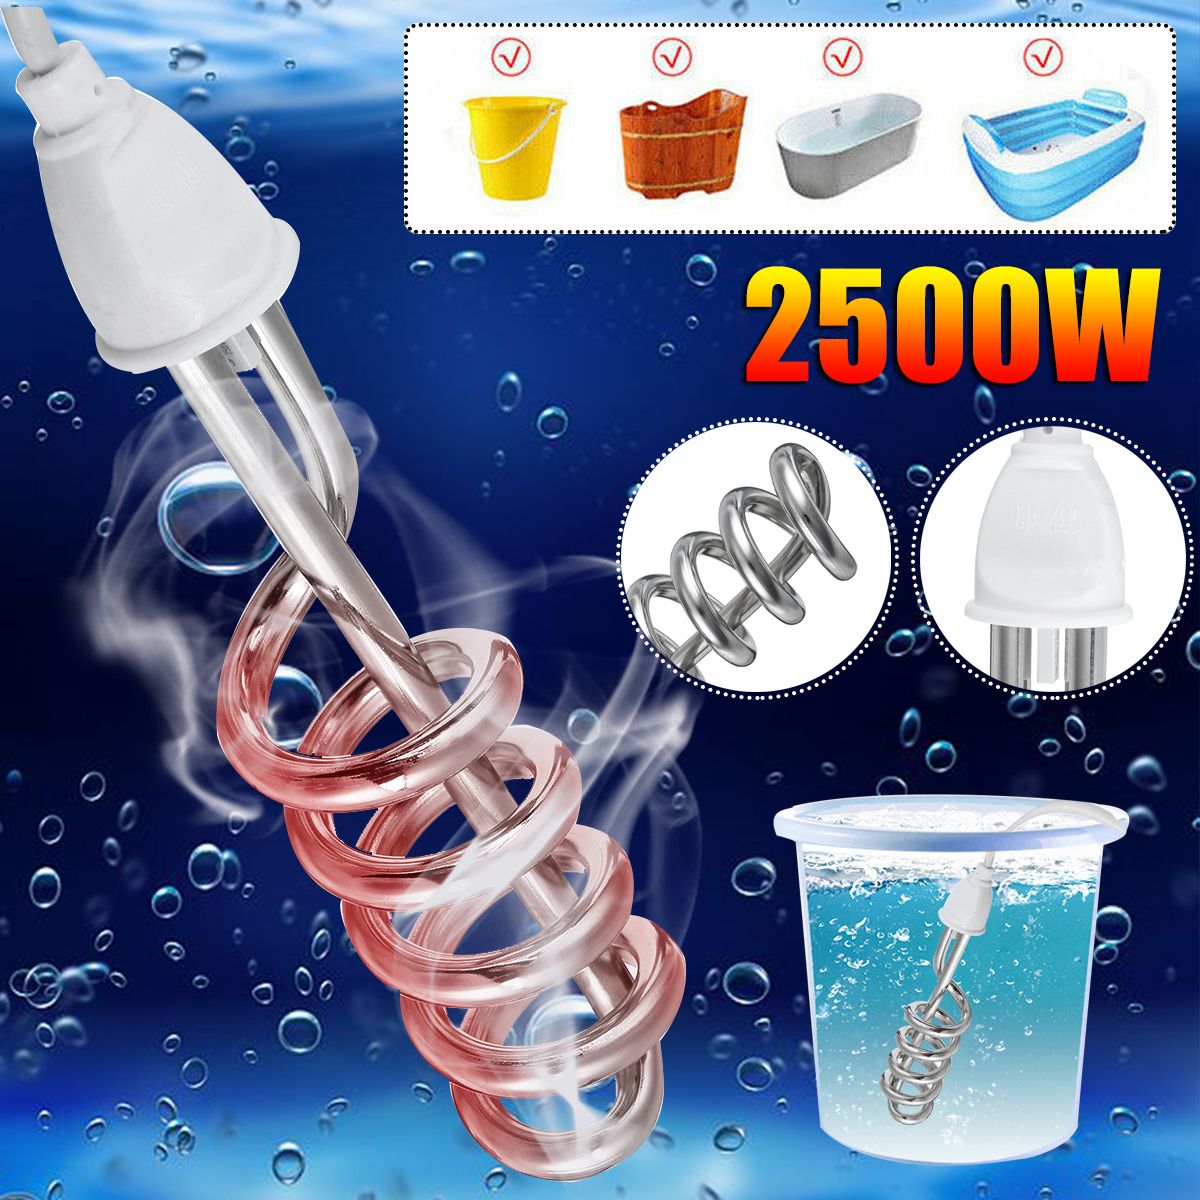 2500W-220V-Automatic-Power-off-Electric-Suspension-Water-Heater-Heating-Rod-for-Inflatable-Tub-Trave-1709951